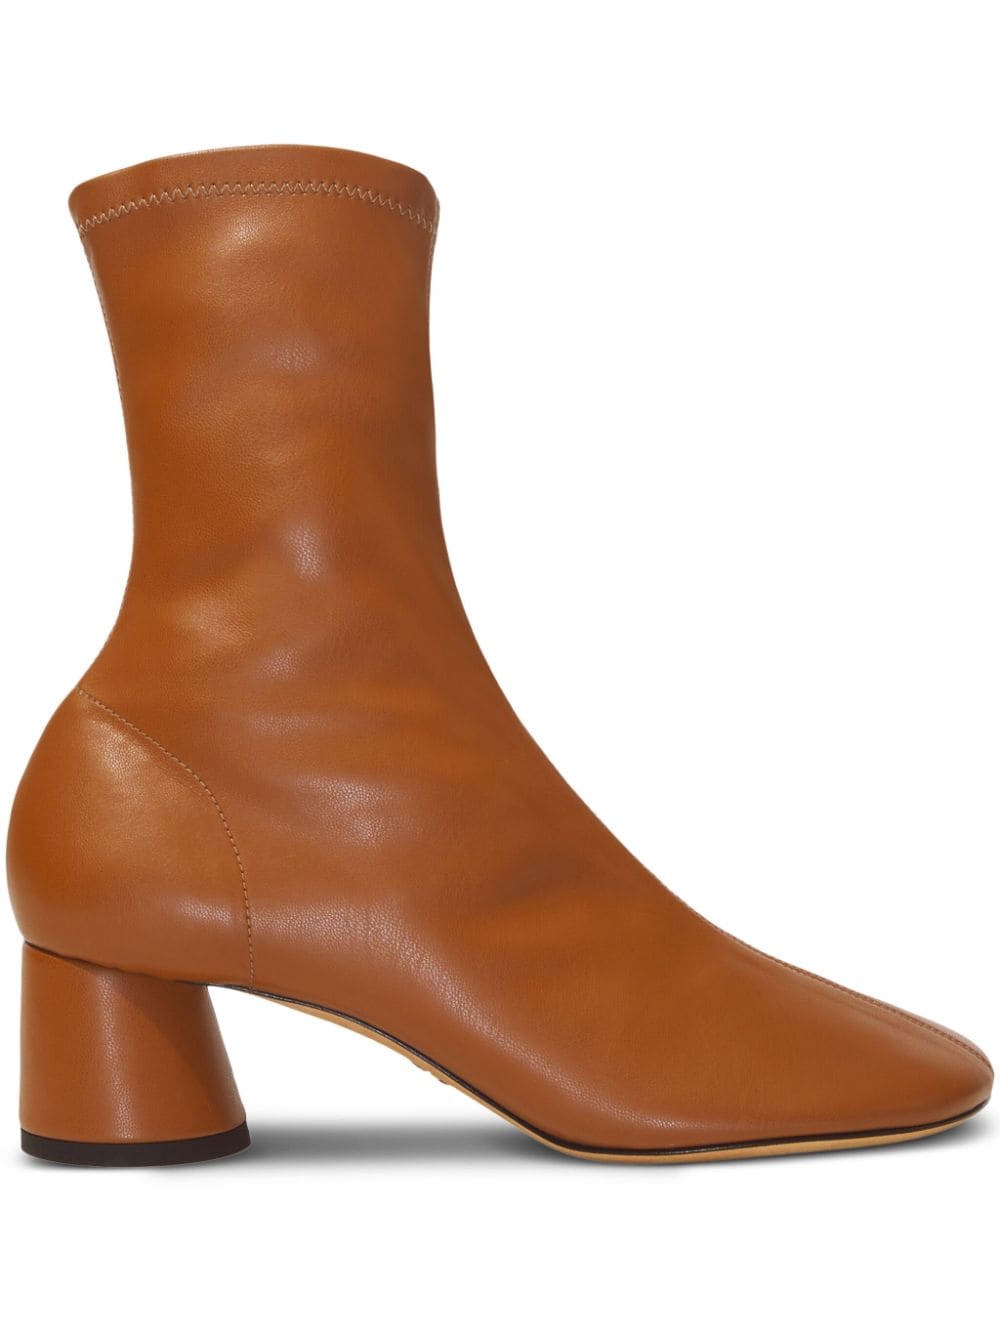 PROENZA SCHOULER GLOVE PULL-ON LEATHER BOOTS